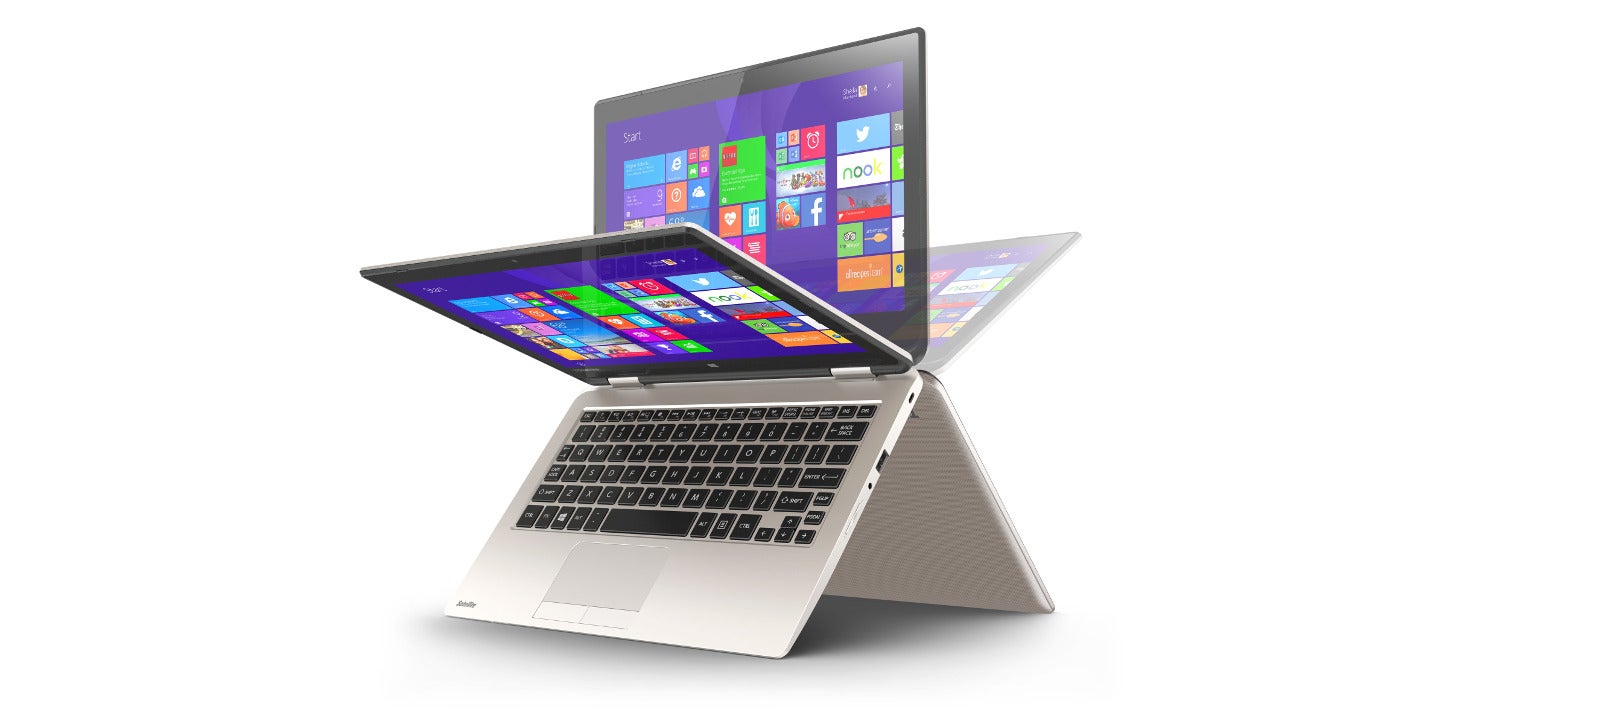 VOTE For The Best Laptop Or Convertible Of The Year: Gizmodo Awards 2014